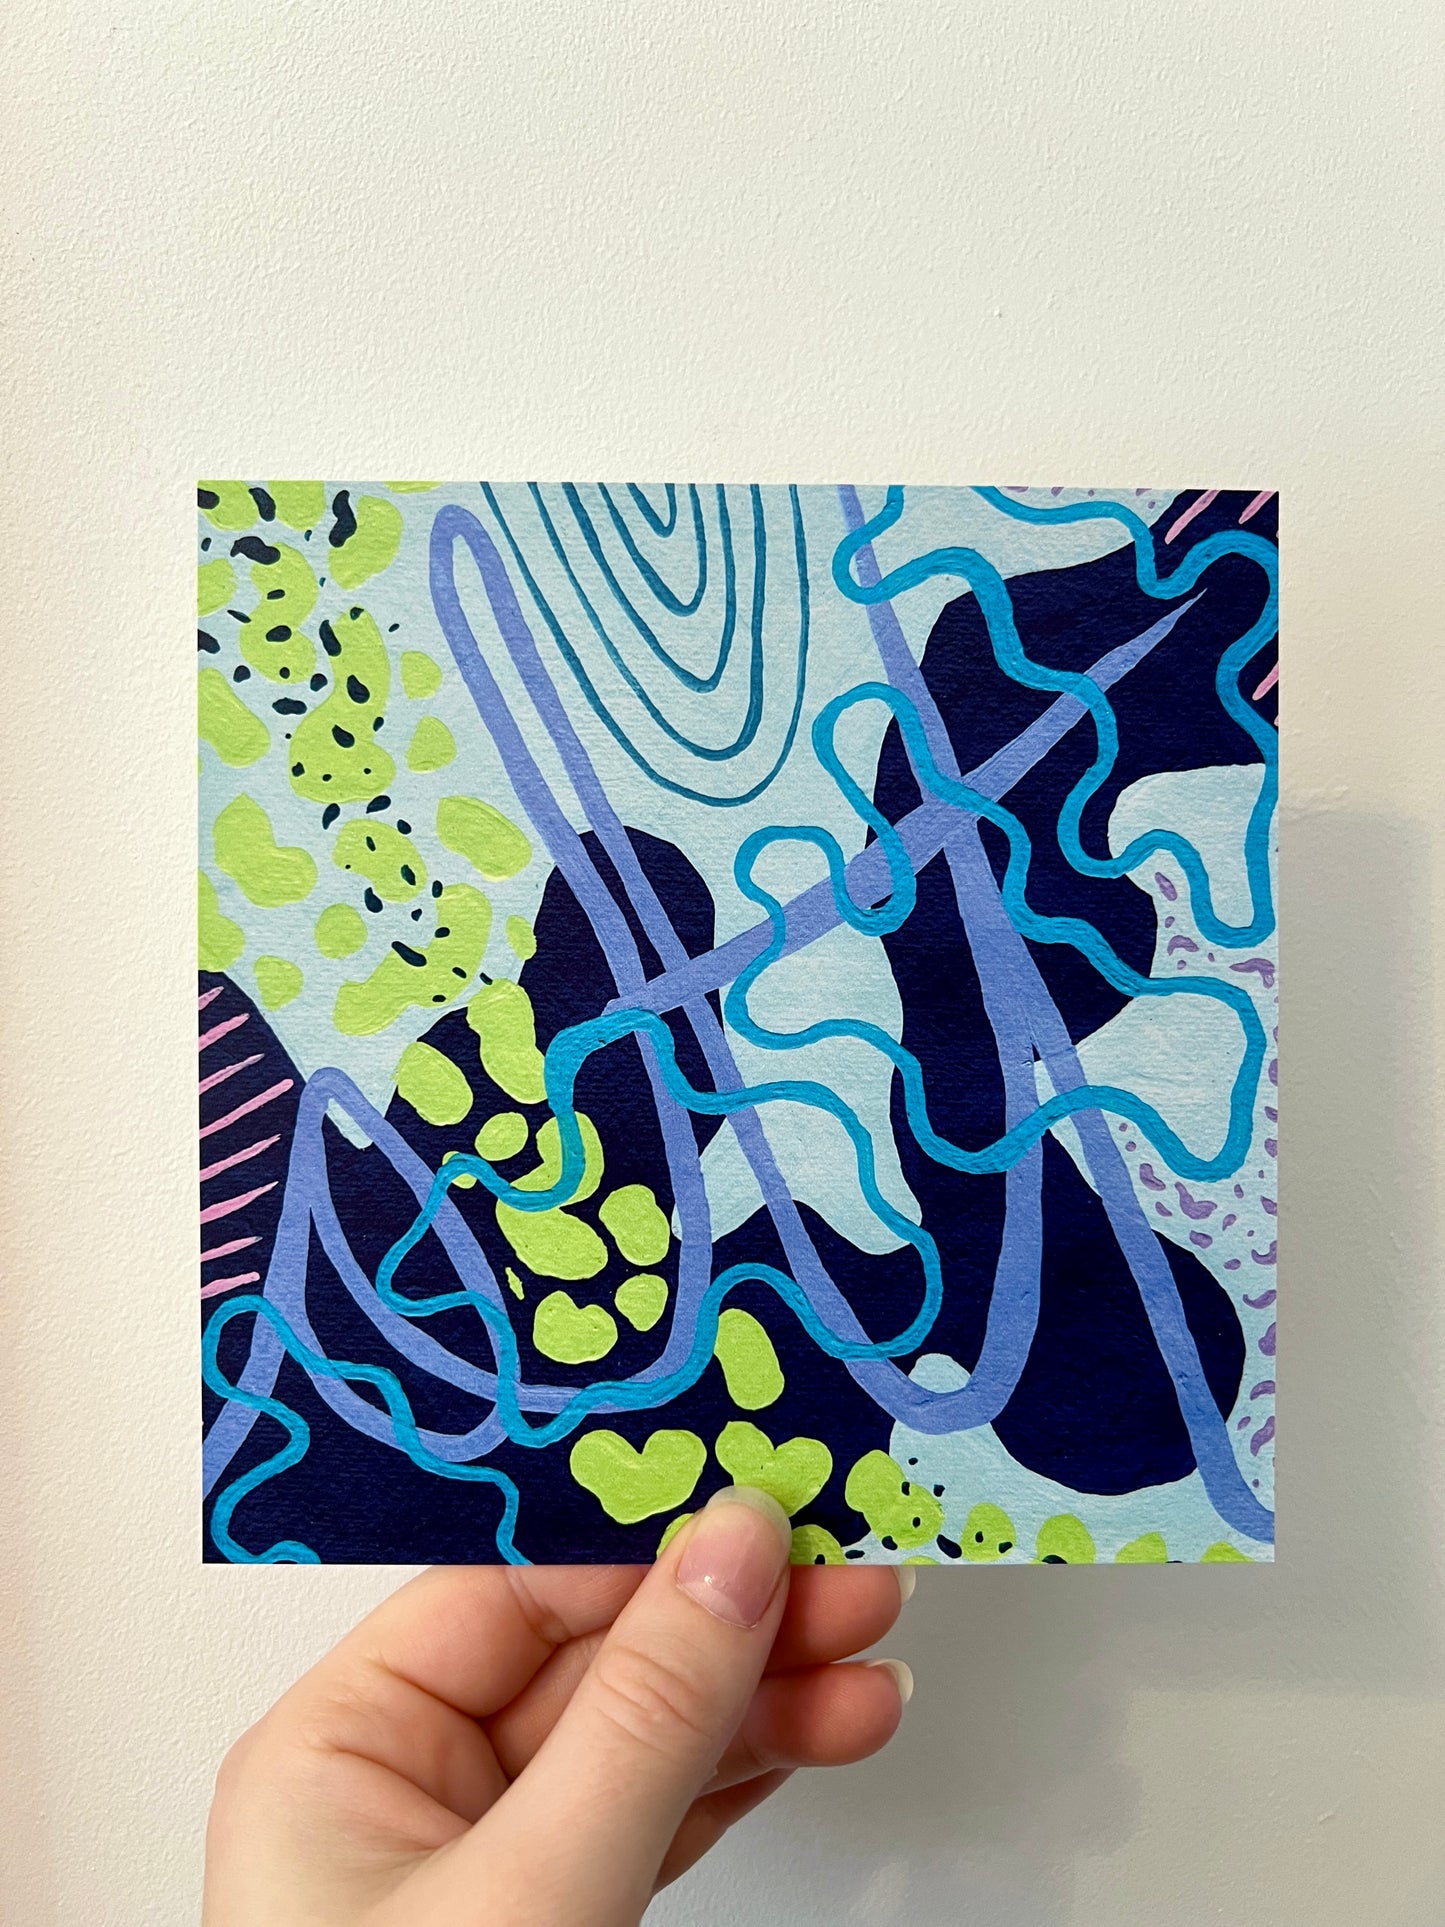 A hand holding a print containing abstract shapes of varying shades of blue with green shapes sweeping across against a white wall.